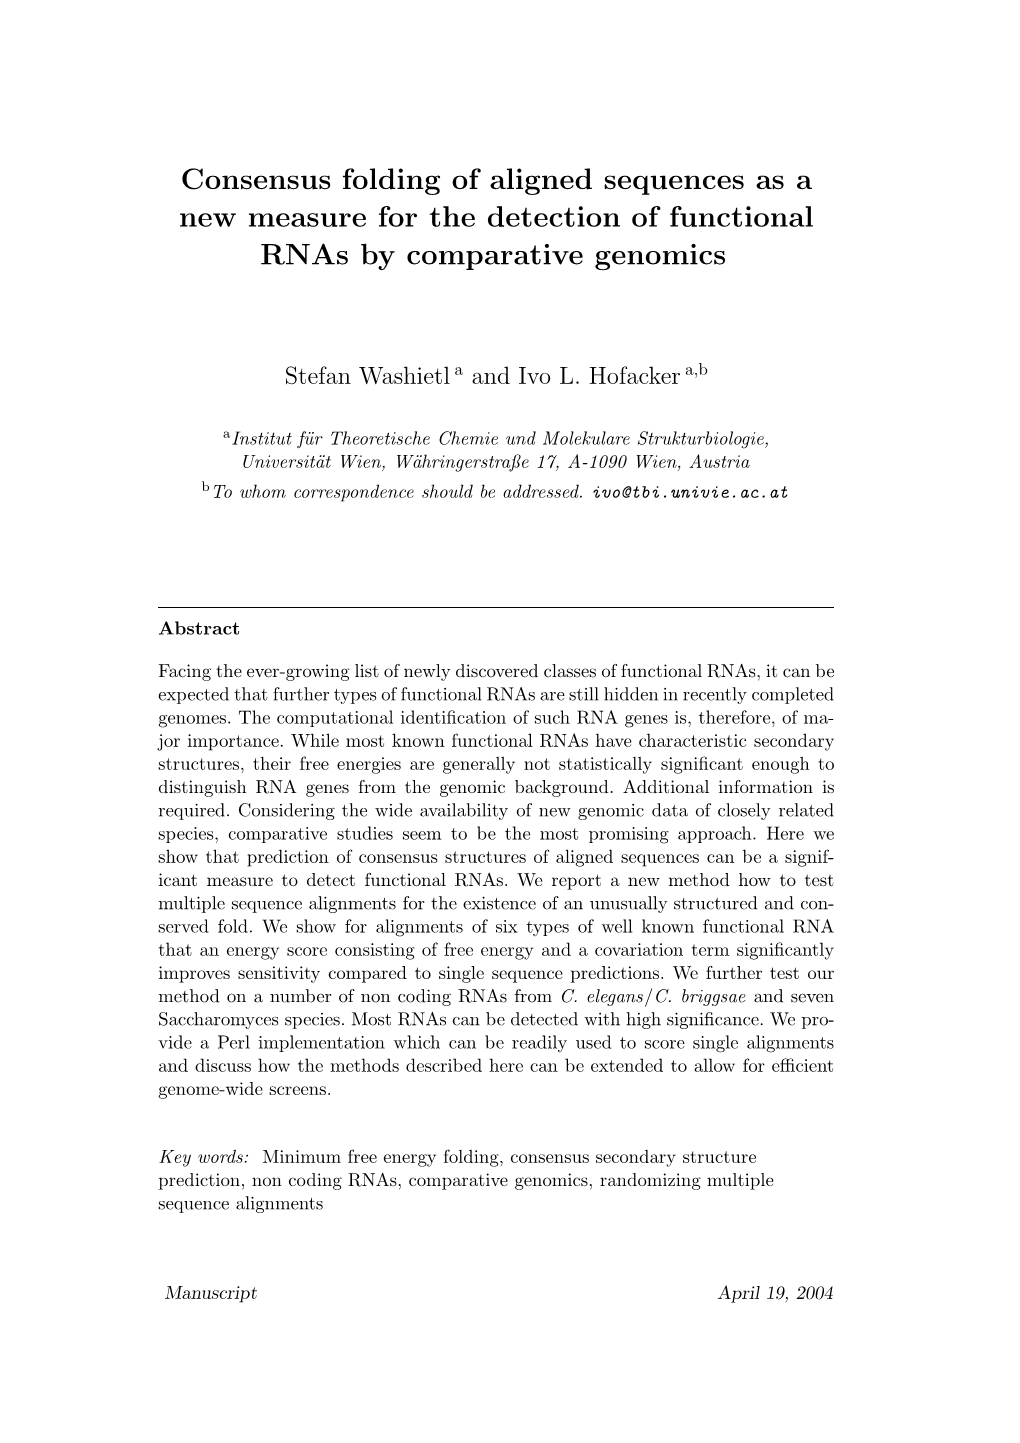 Consensus Folding of Aligned Sequences As a New Measure for the Detection of Functional Rnas by Comparative Genomics